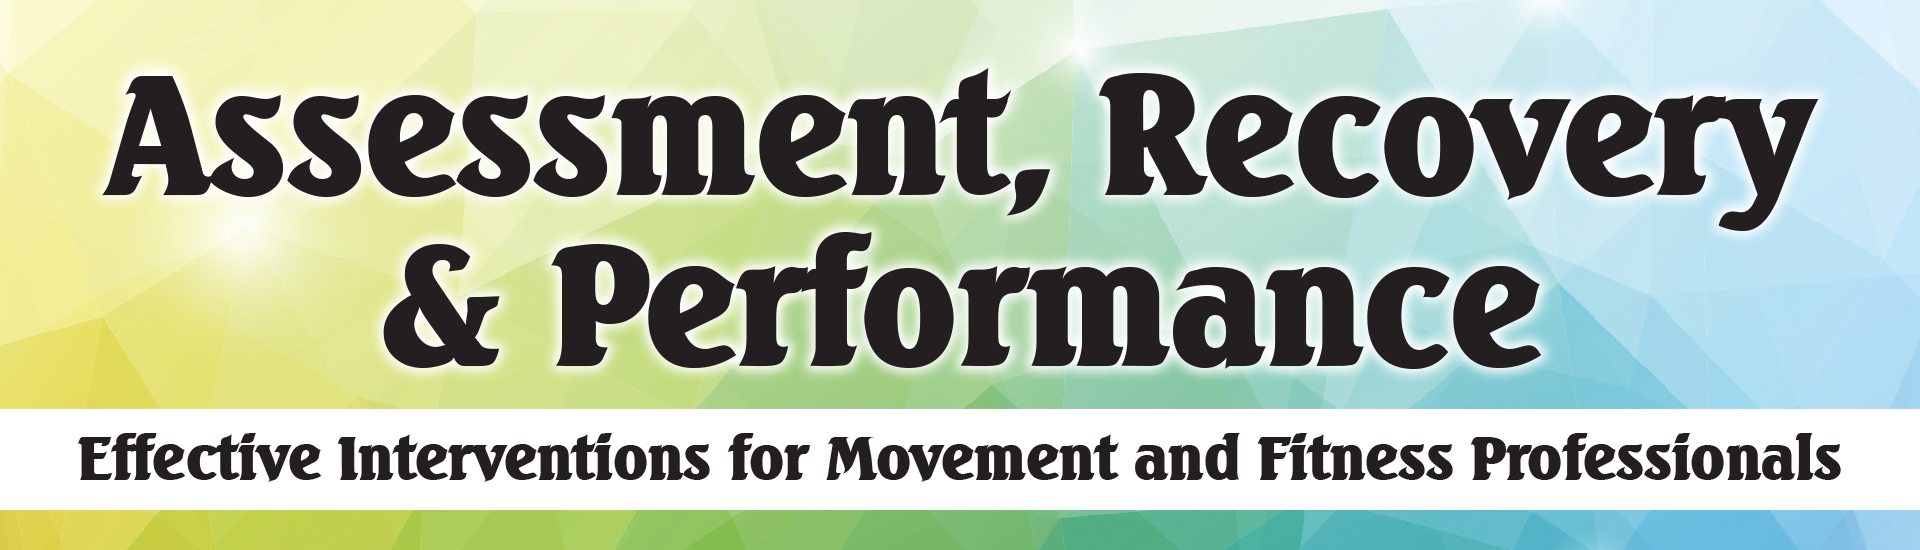 Assessment, Recovery & Performance: Effective Interventions for Movement and Fitness Professionals